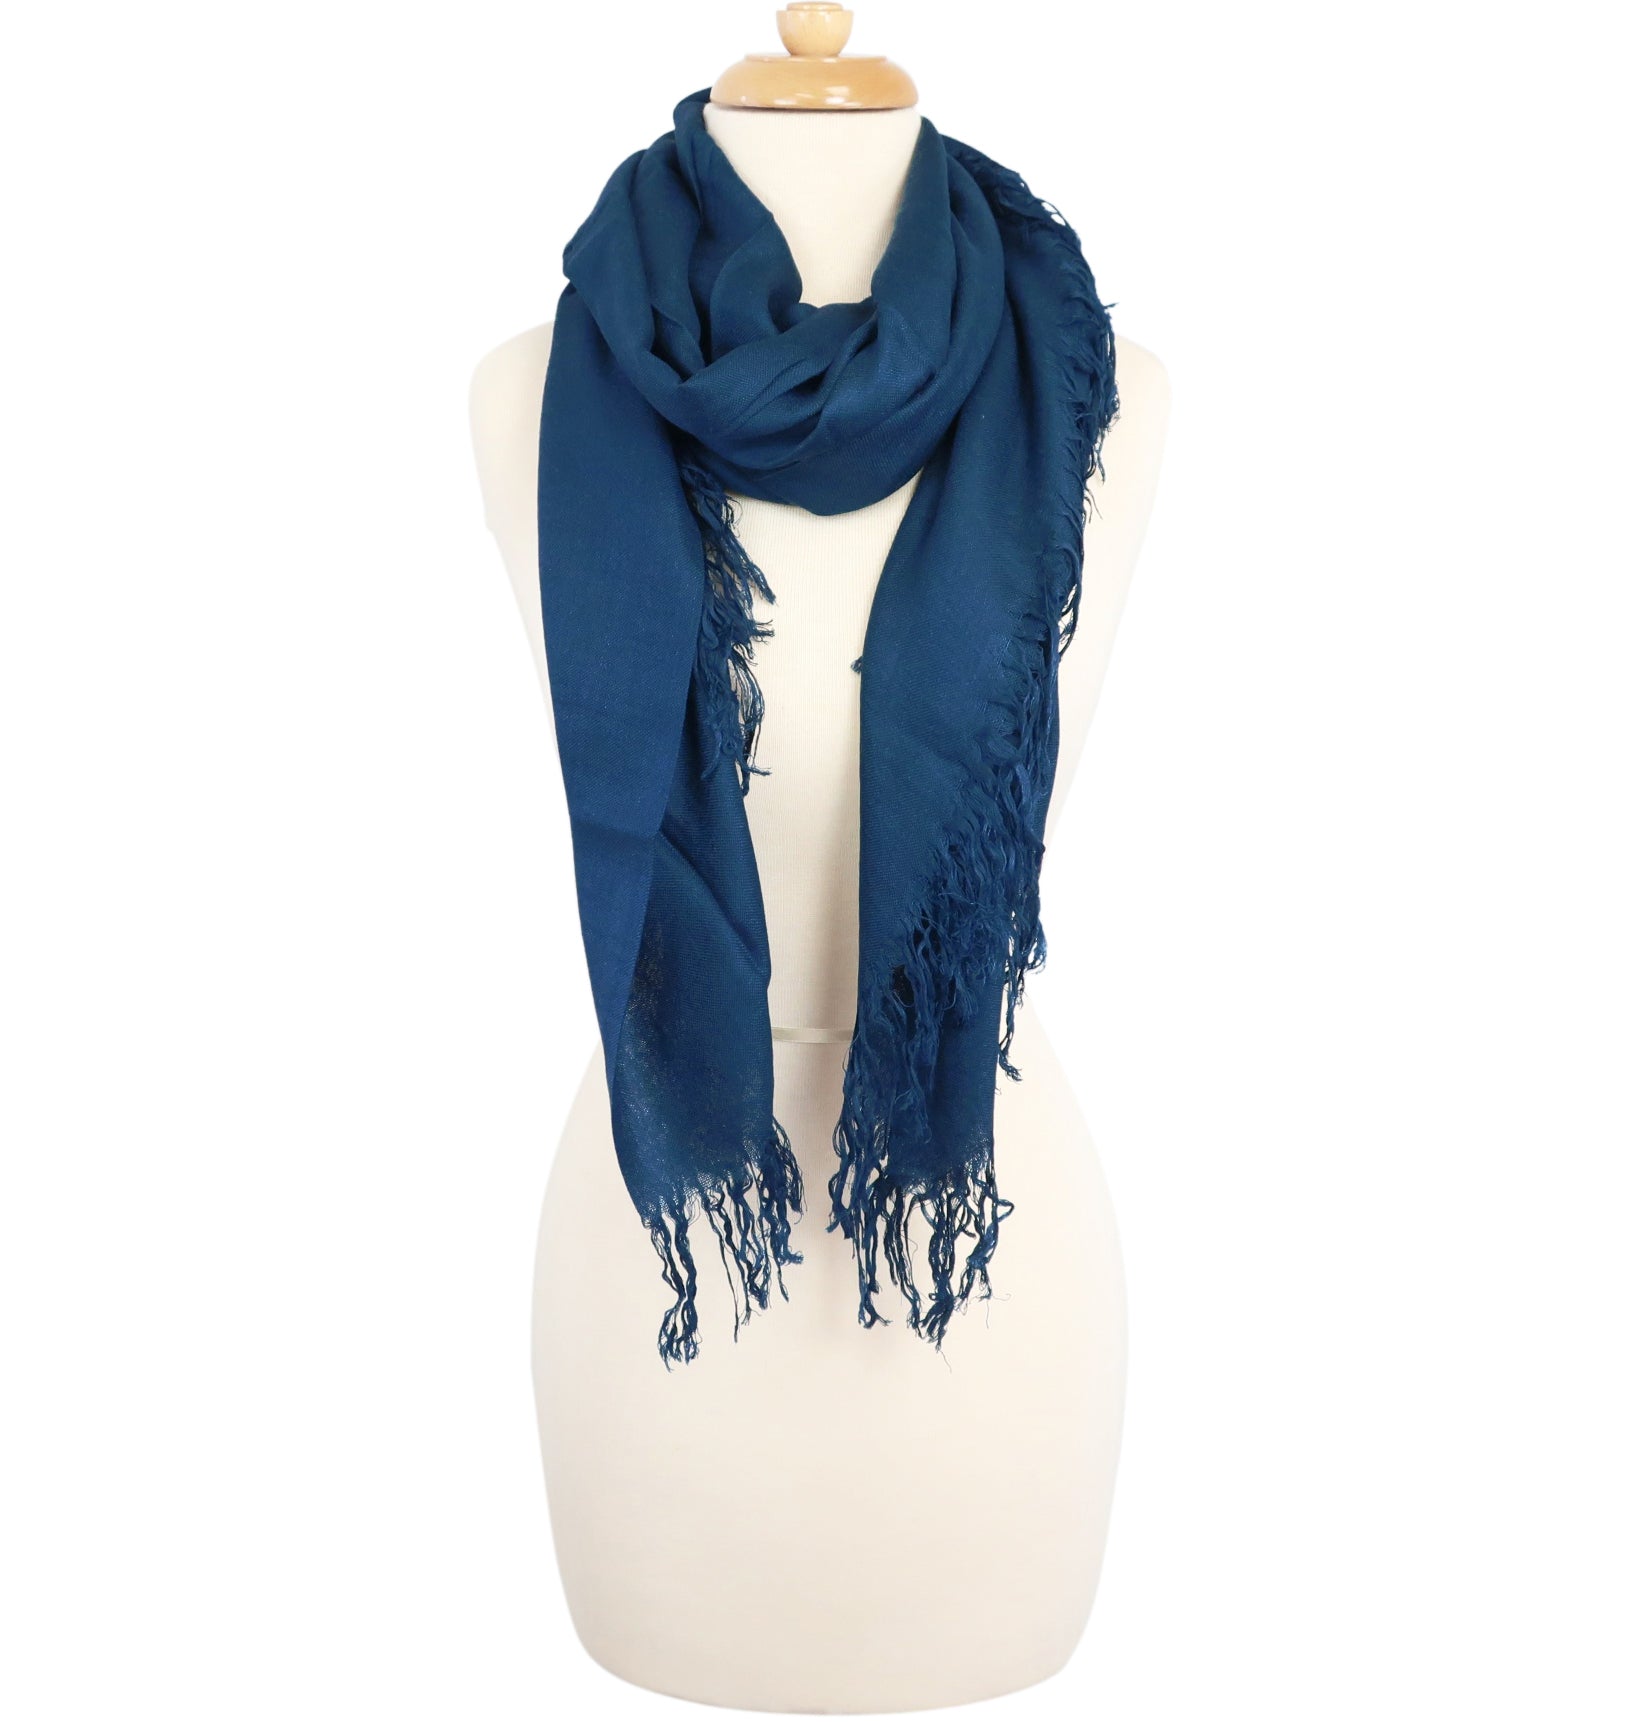 Blue Pacific Tissue Solid Modal and Cashmere Scarf Shawl in Ocean Blue